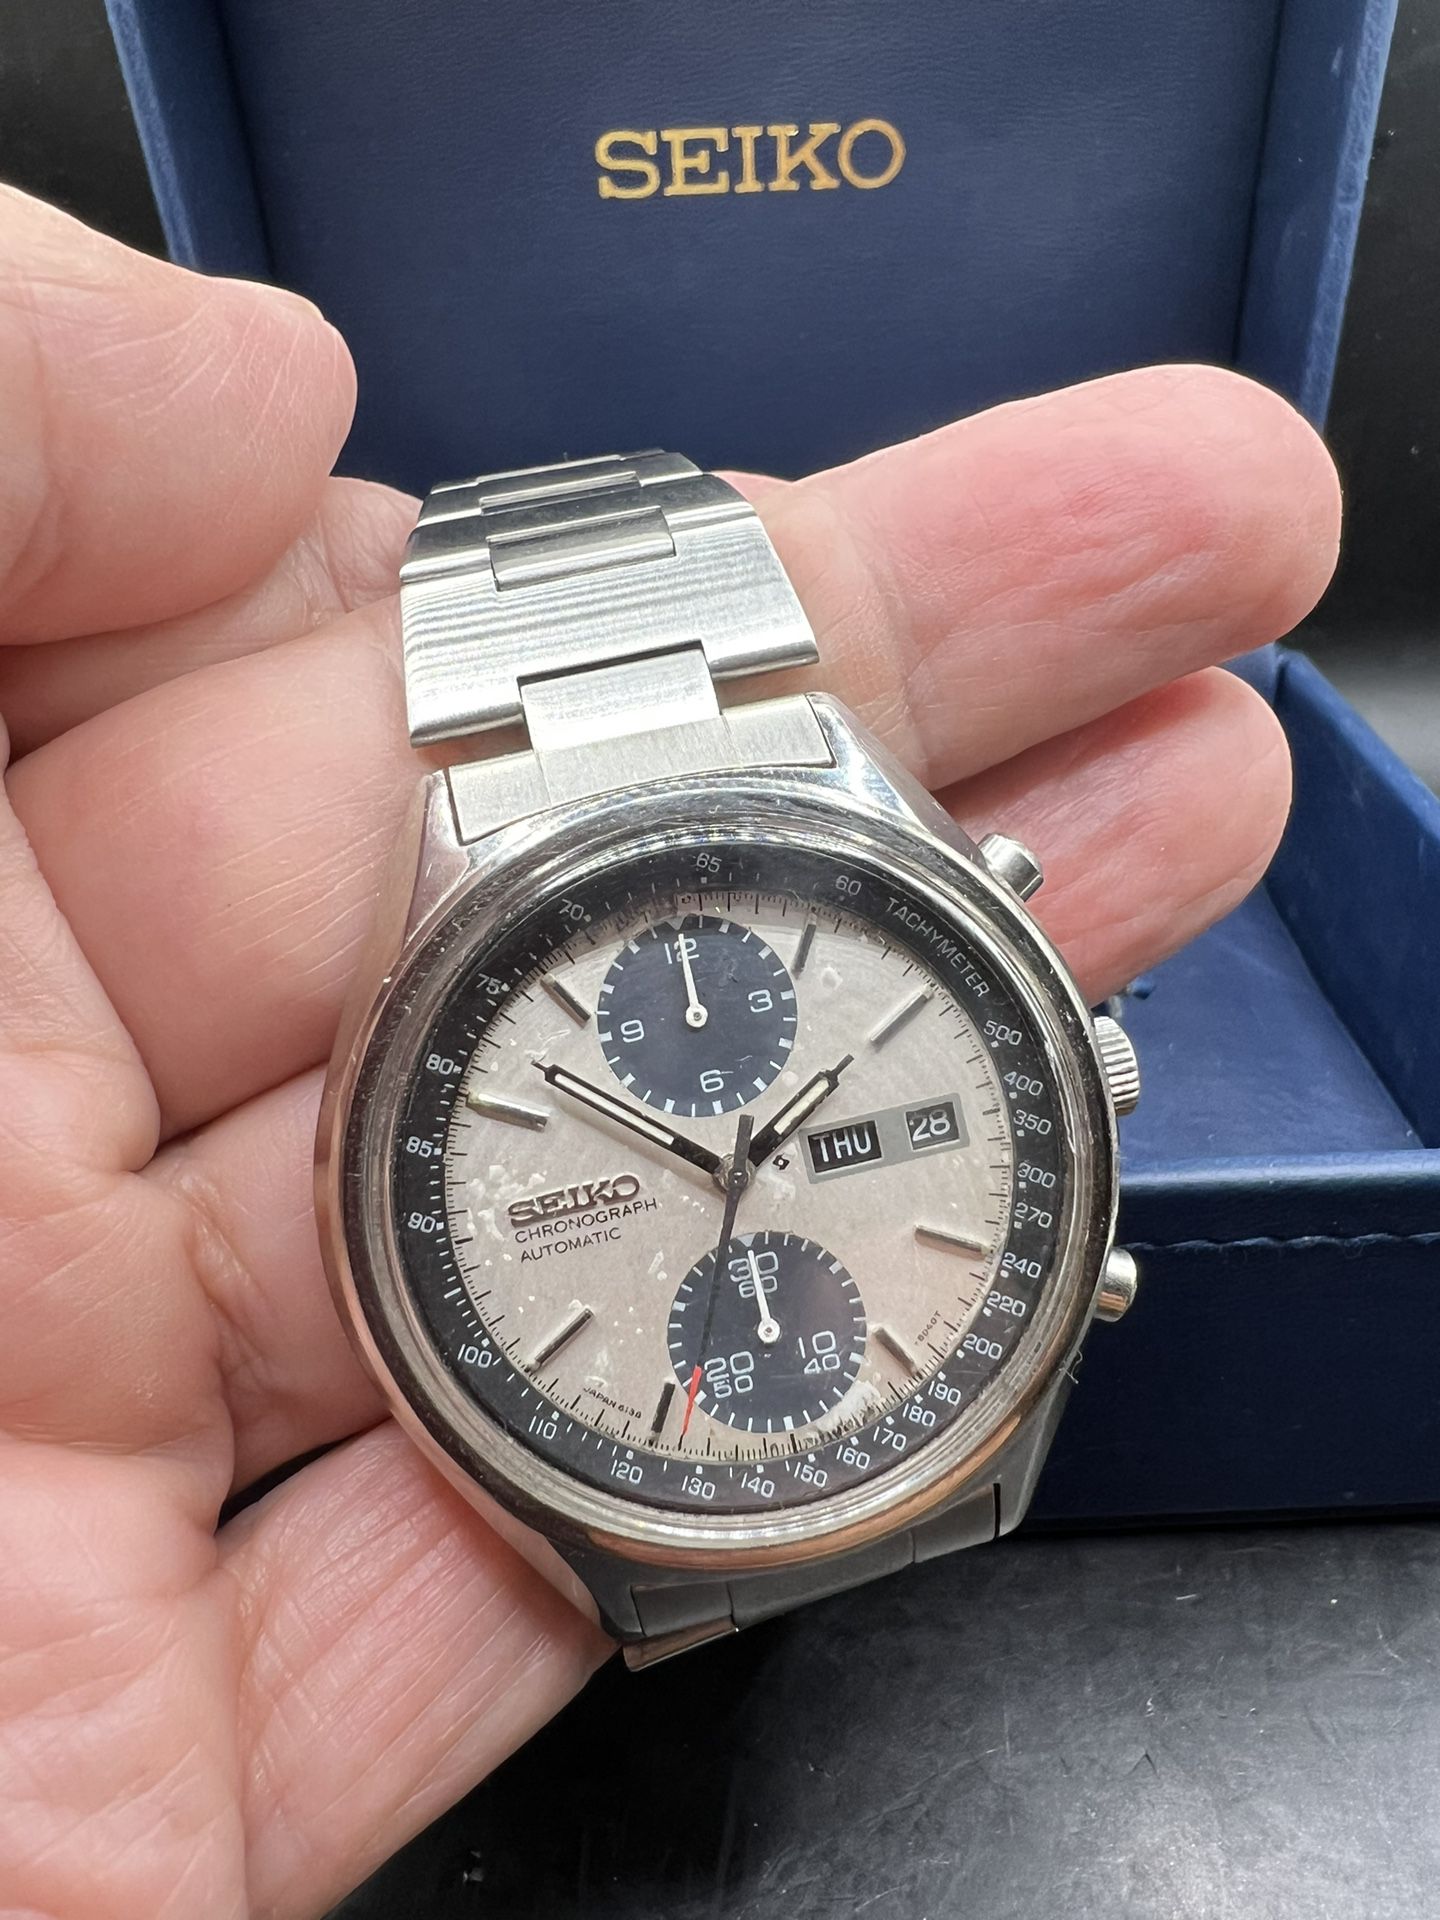 Authentic Seiko Automatic Panda Chronograph From 1970s - Boxed Set